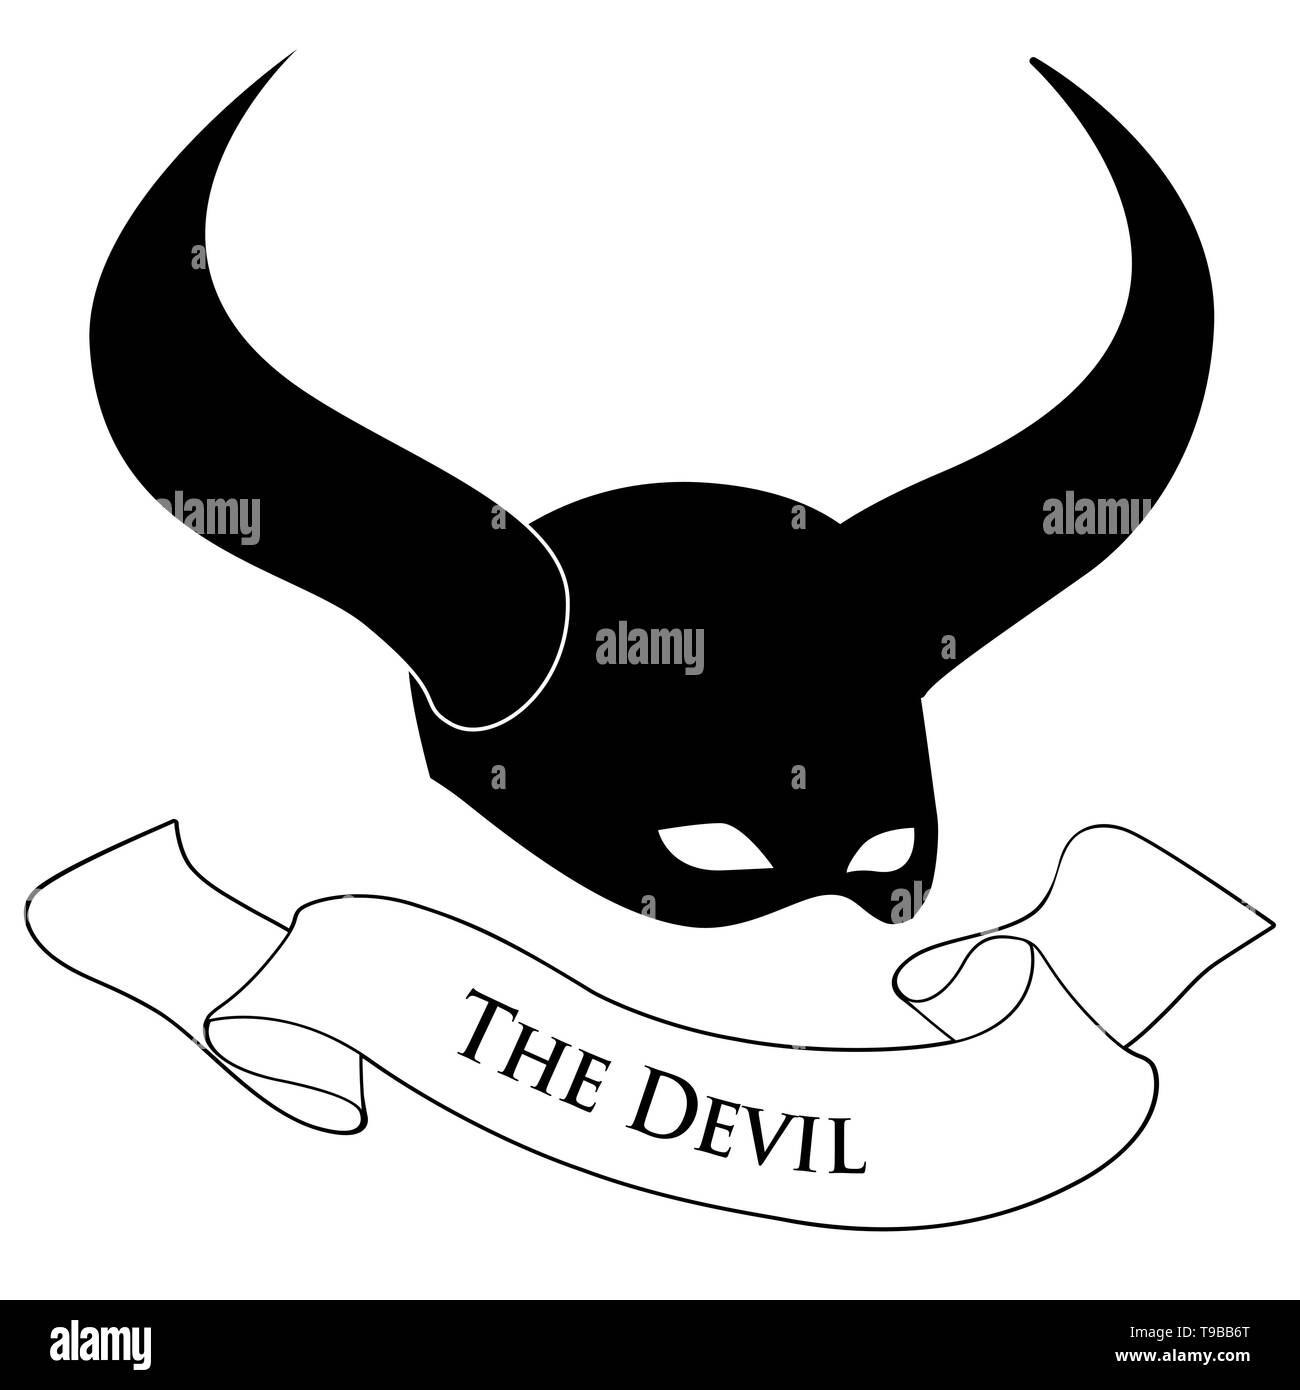 Tarot Card Concept. Devil. Mask with horns. Devil costume and text banner isolated on white background. Stock Vector